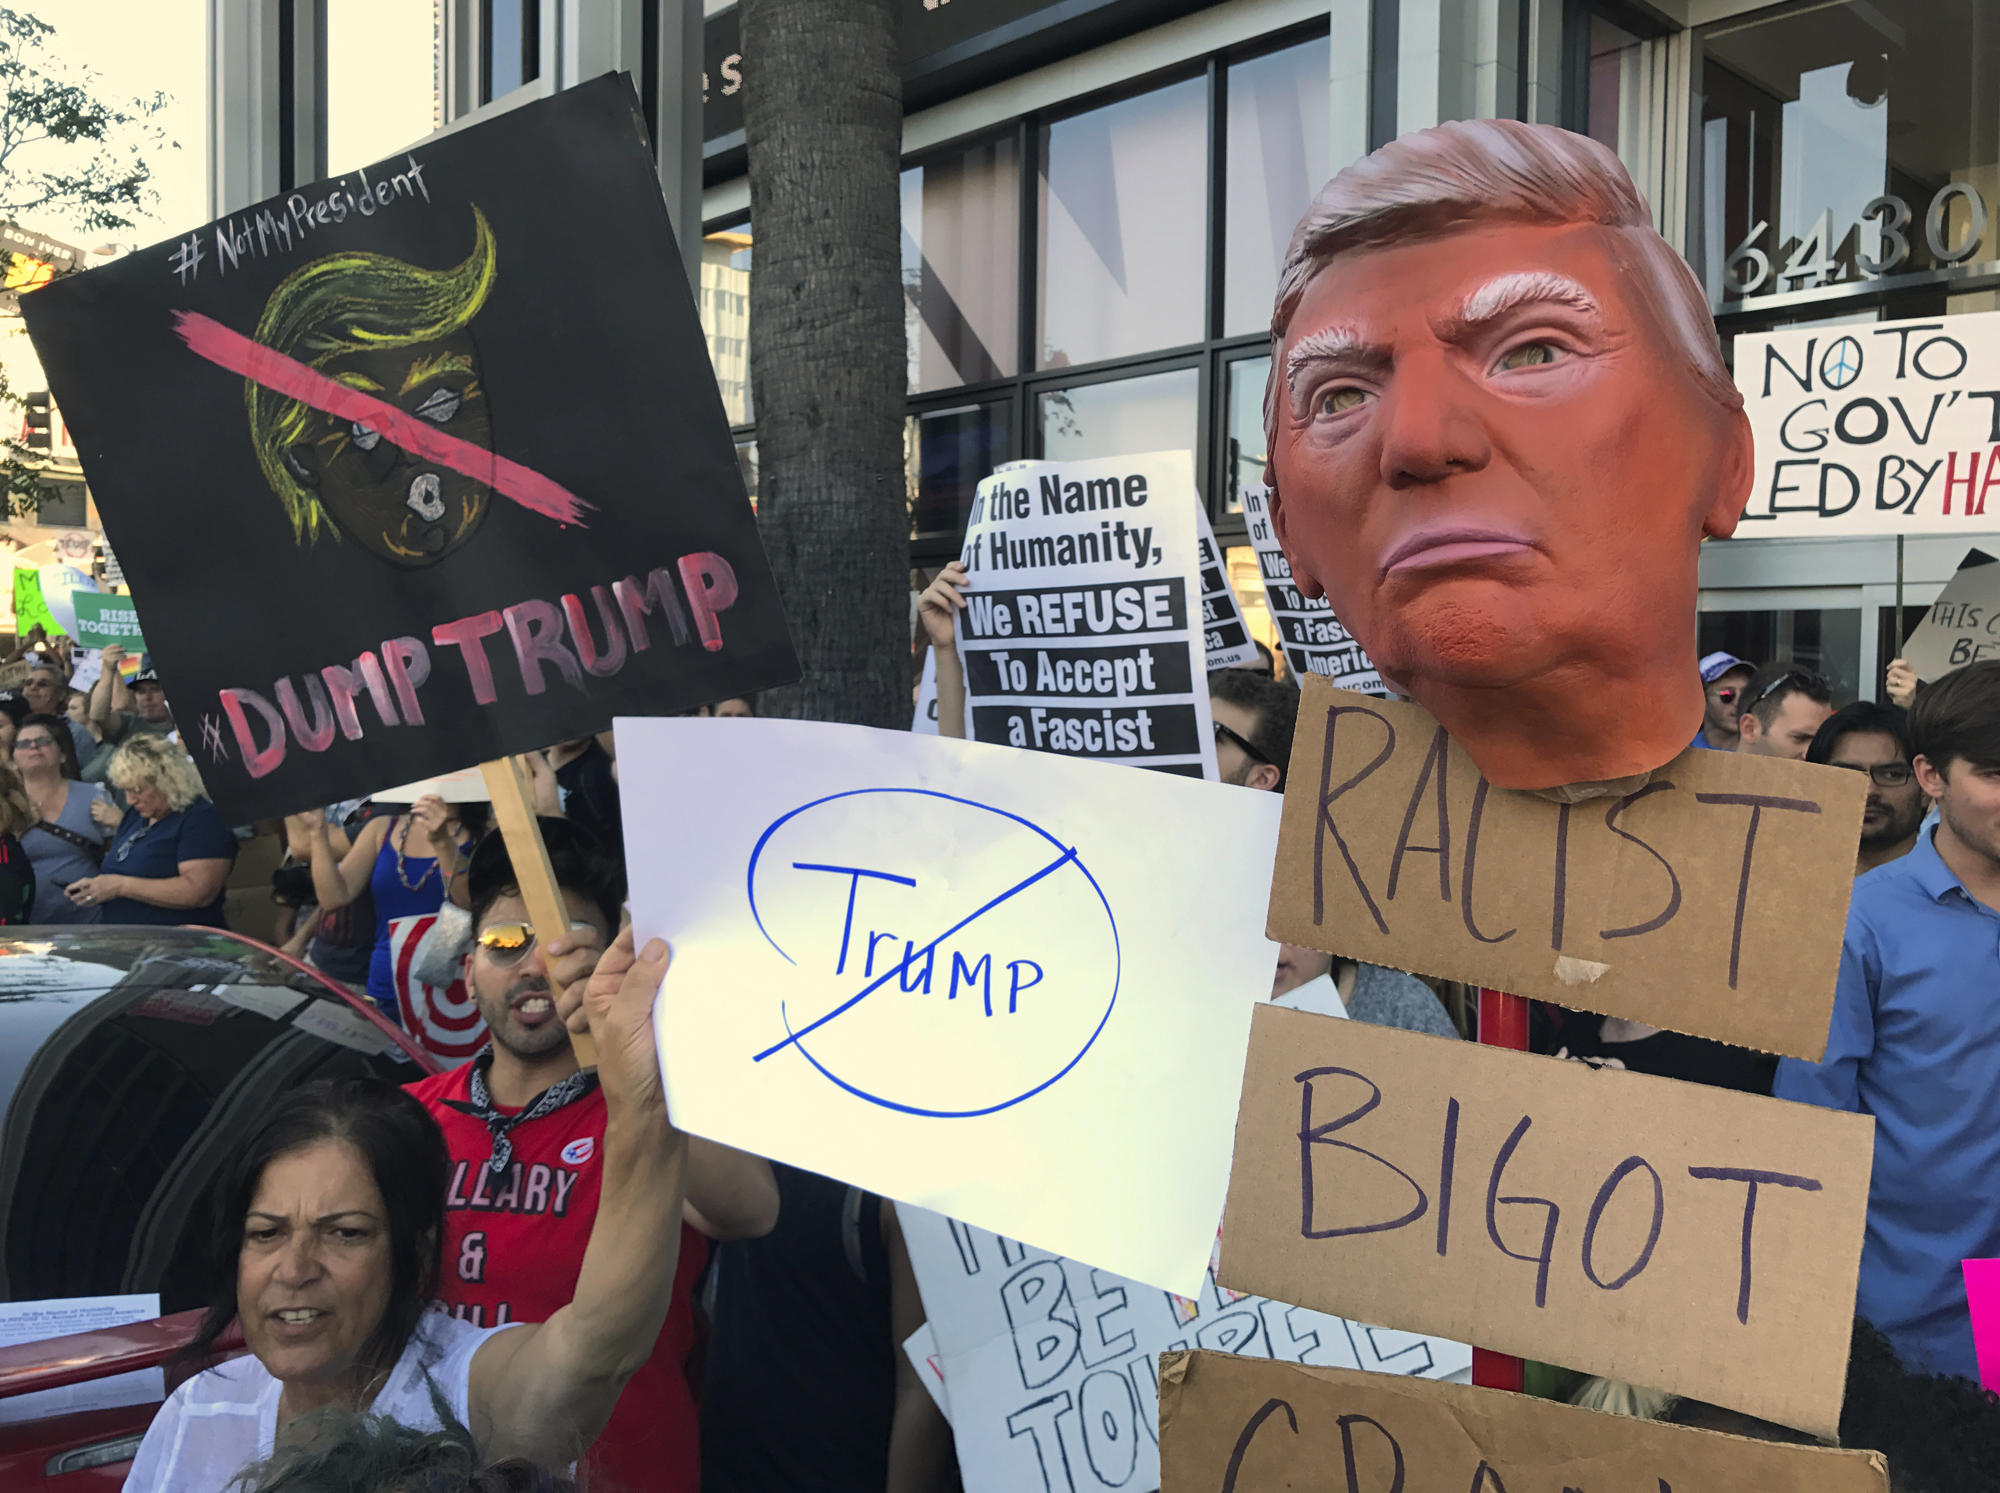 Protesters hold banners during a rally outside the CNN studios, in opposition to President-elect Donald Trump, in the Hollywood section of Los Angeles on Sunday, Nov .13, 2016. (AP Photo/Damian Dovarganes)